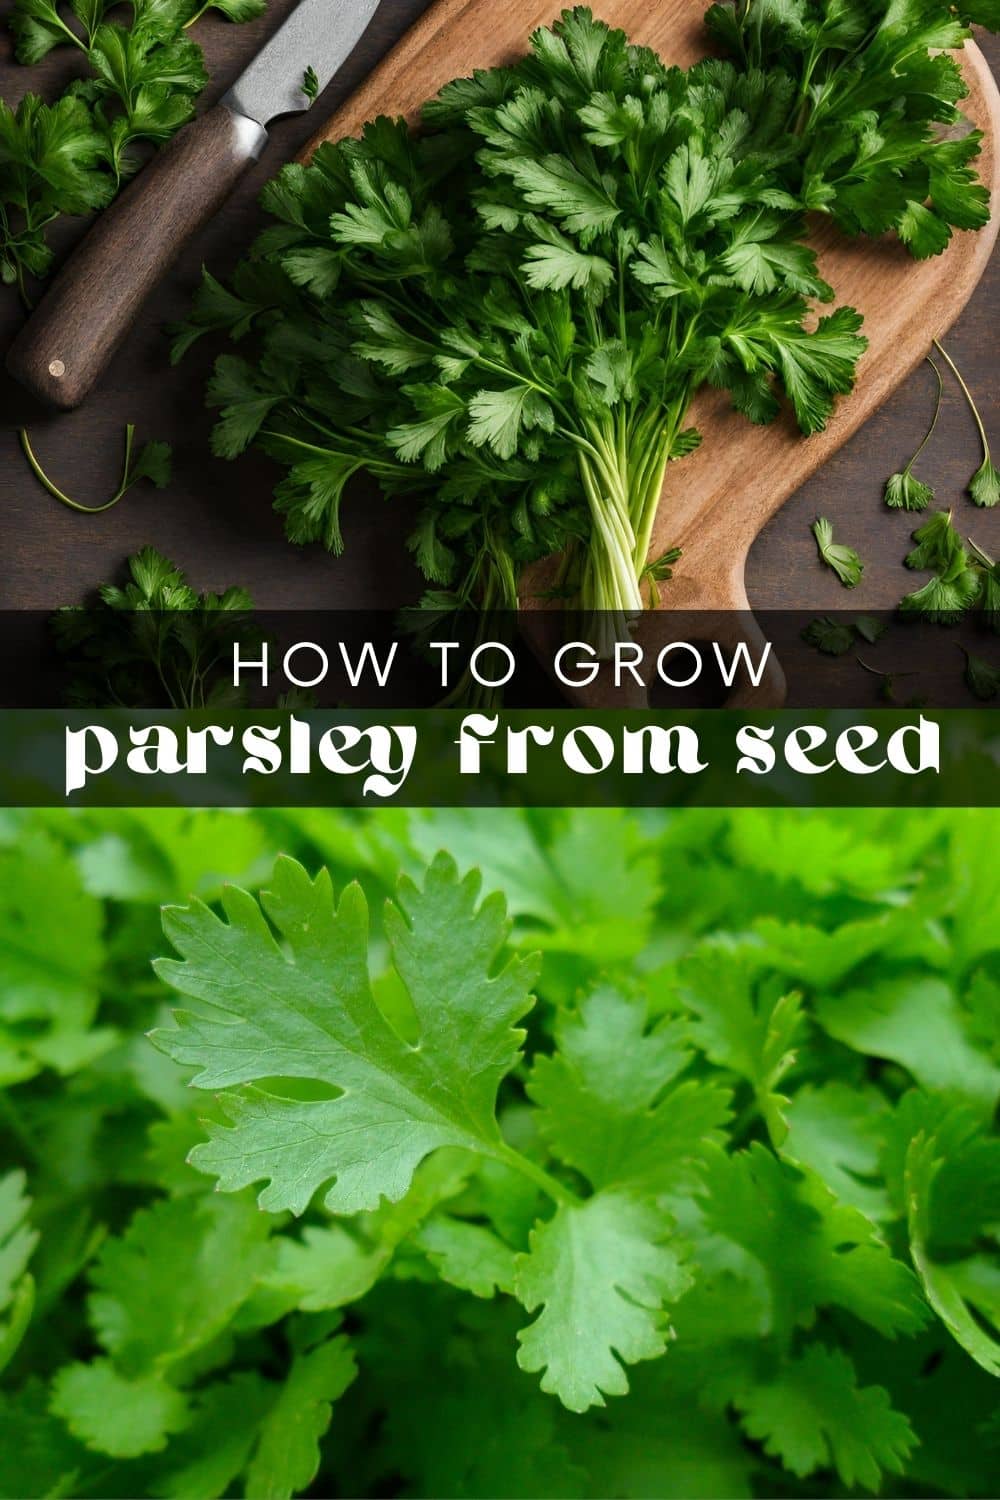 With a compact growth habit and delicate leaves, parsley is the perfect addition to your herb garden. It’s easily grown in small spaces, pots, or even on windowsills! Learn how to grow parsley, and then use it to garnish your meals or add flavor to soups and stews.